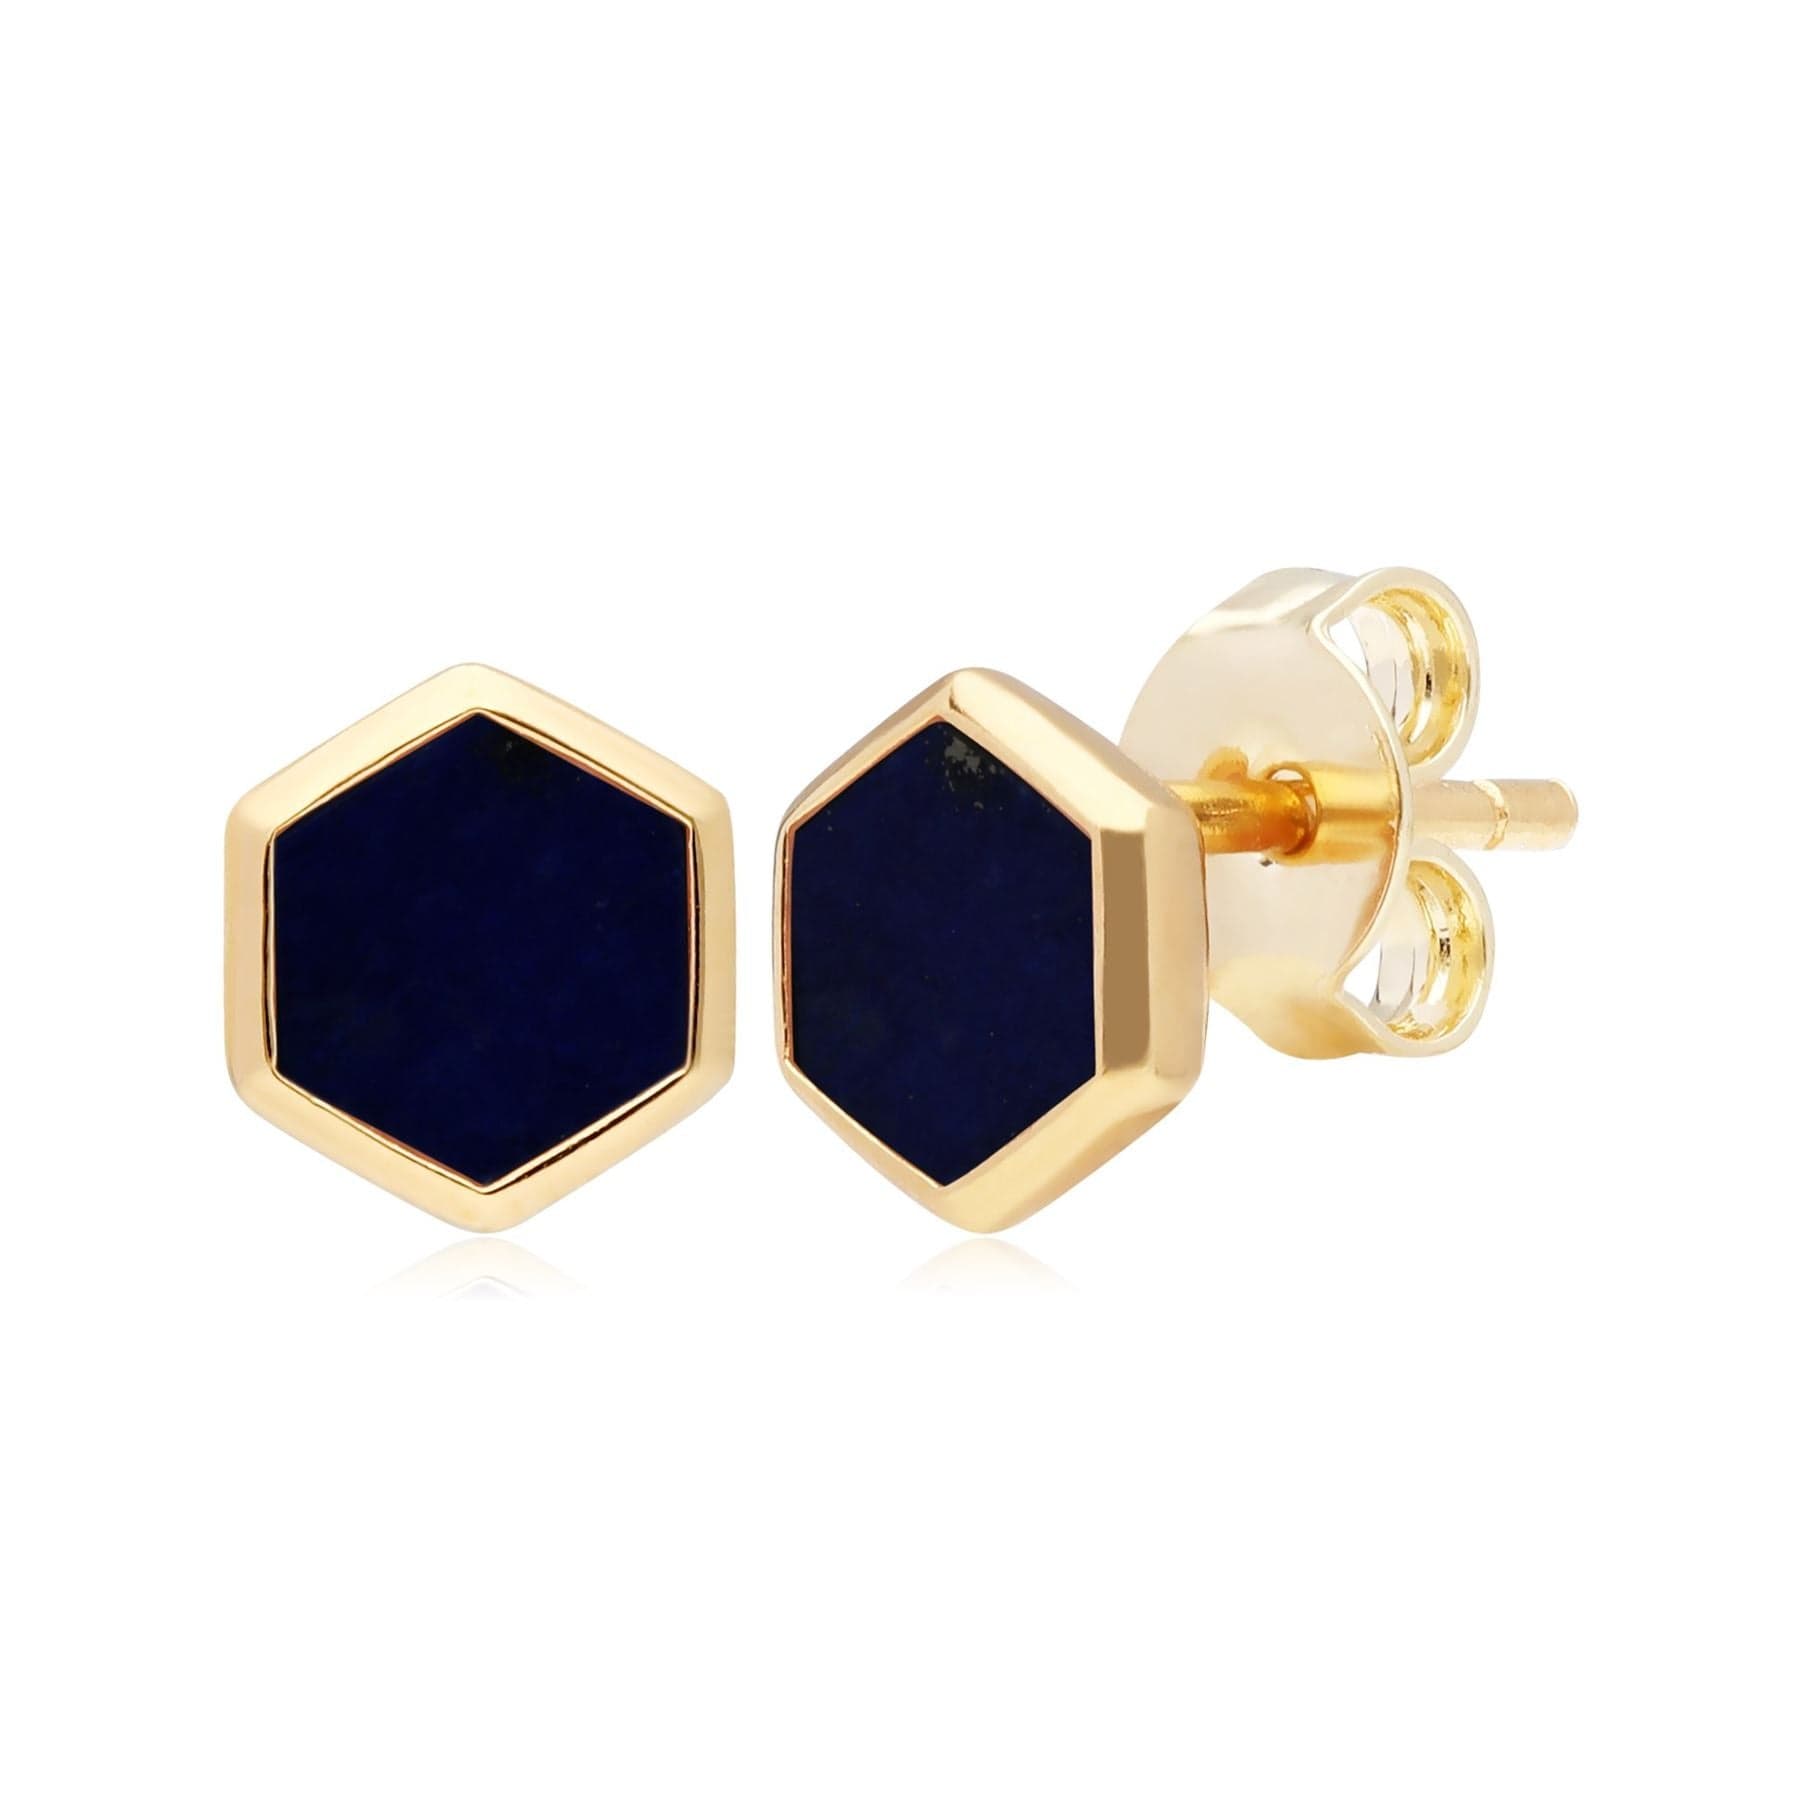 Micro Statement Lapis Lazuli Stud Earrings in Gold Plated 925 Sterling Silver